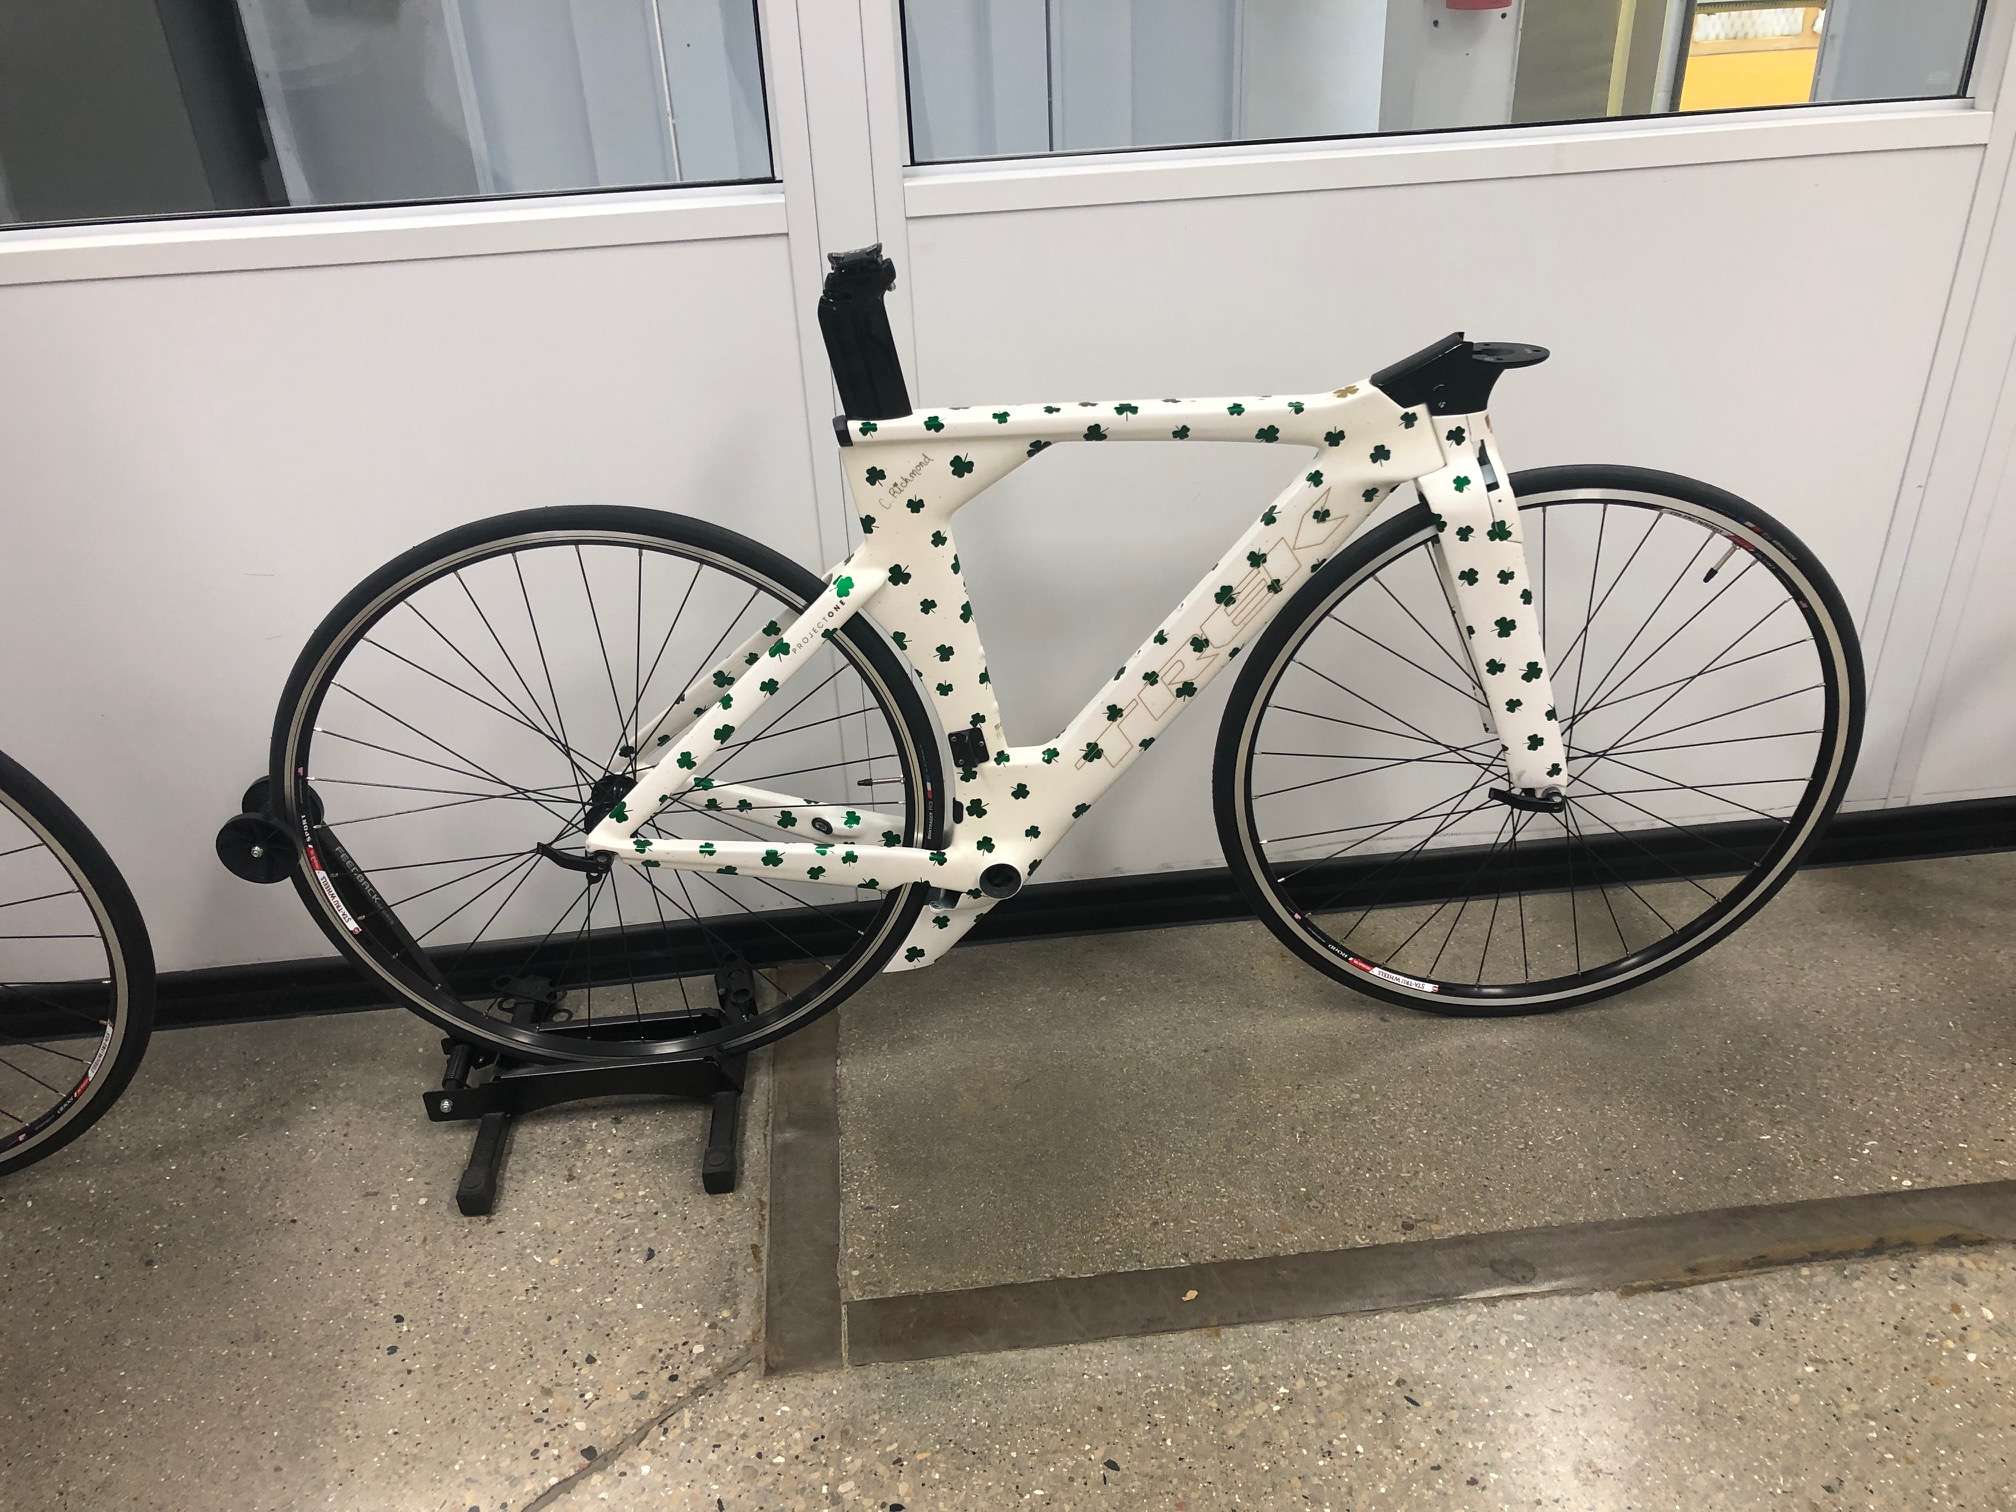 White bicycle frame with green clovers painted all over 